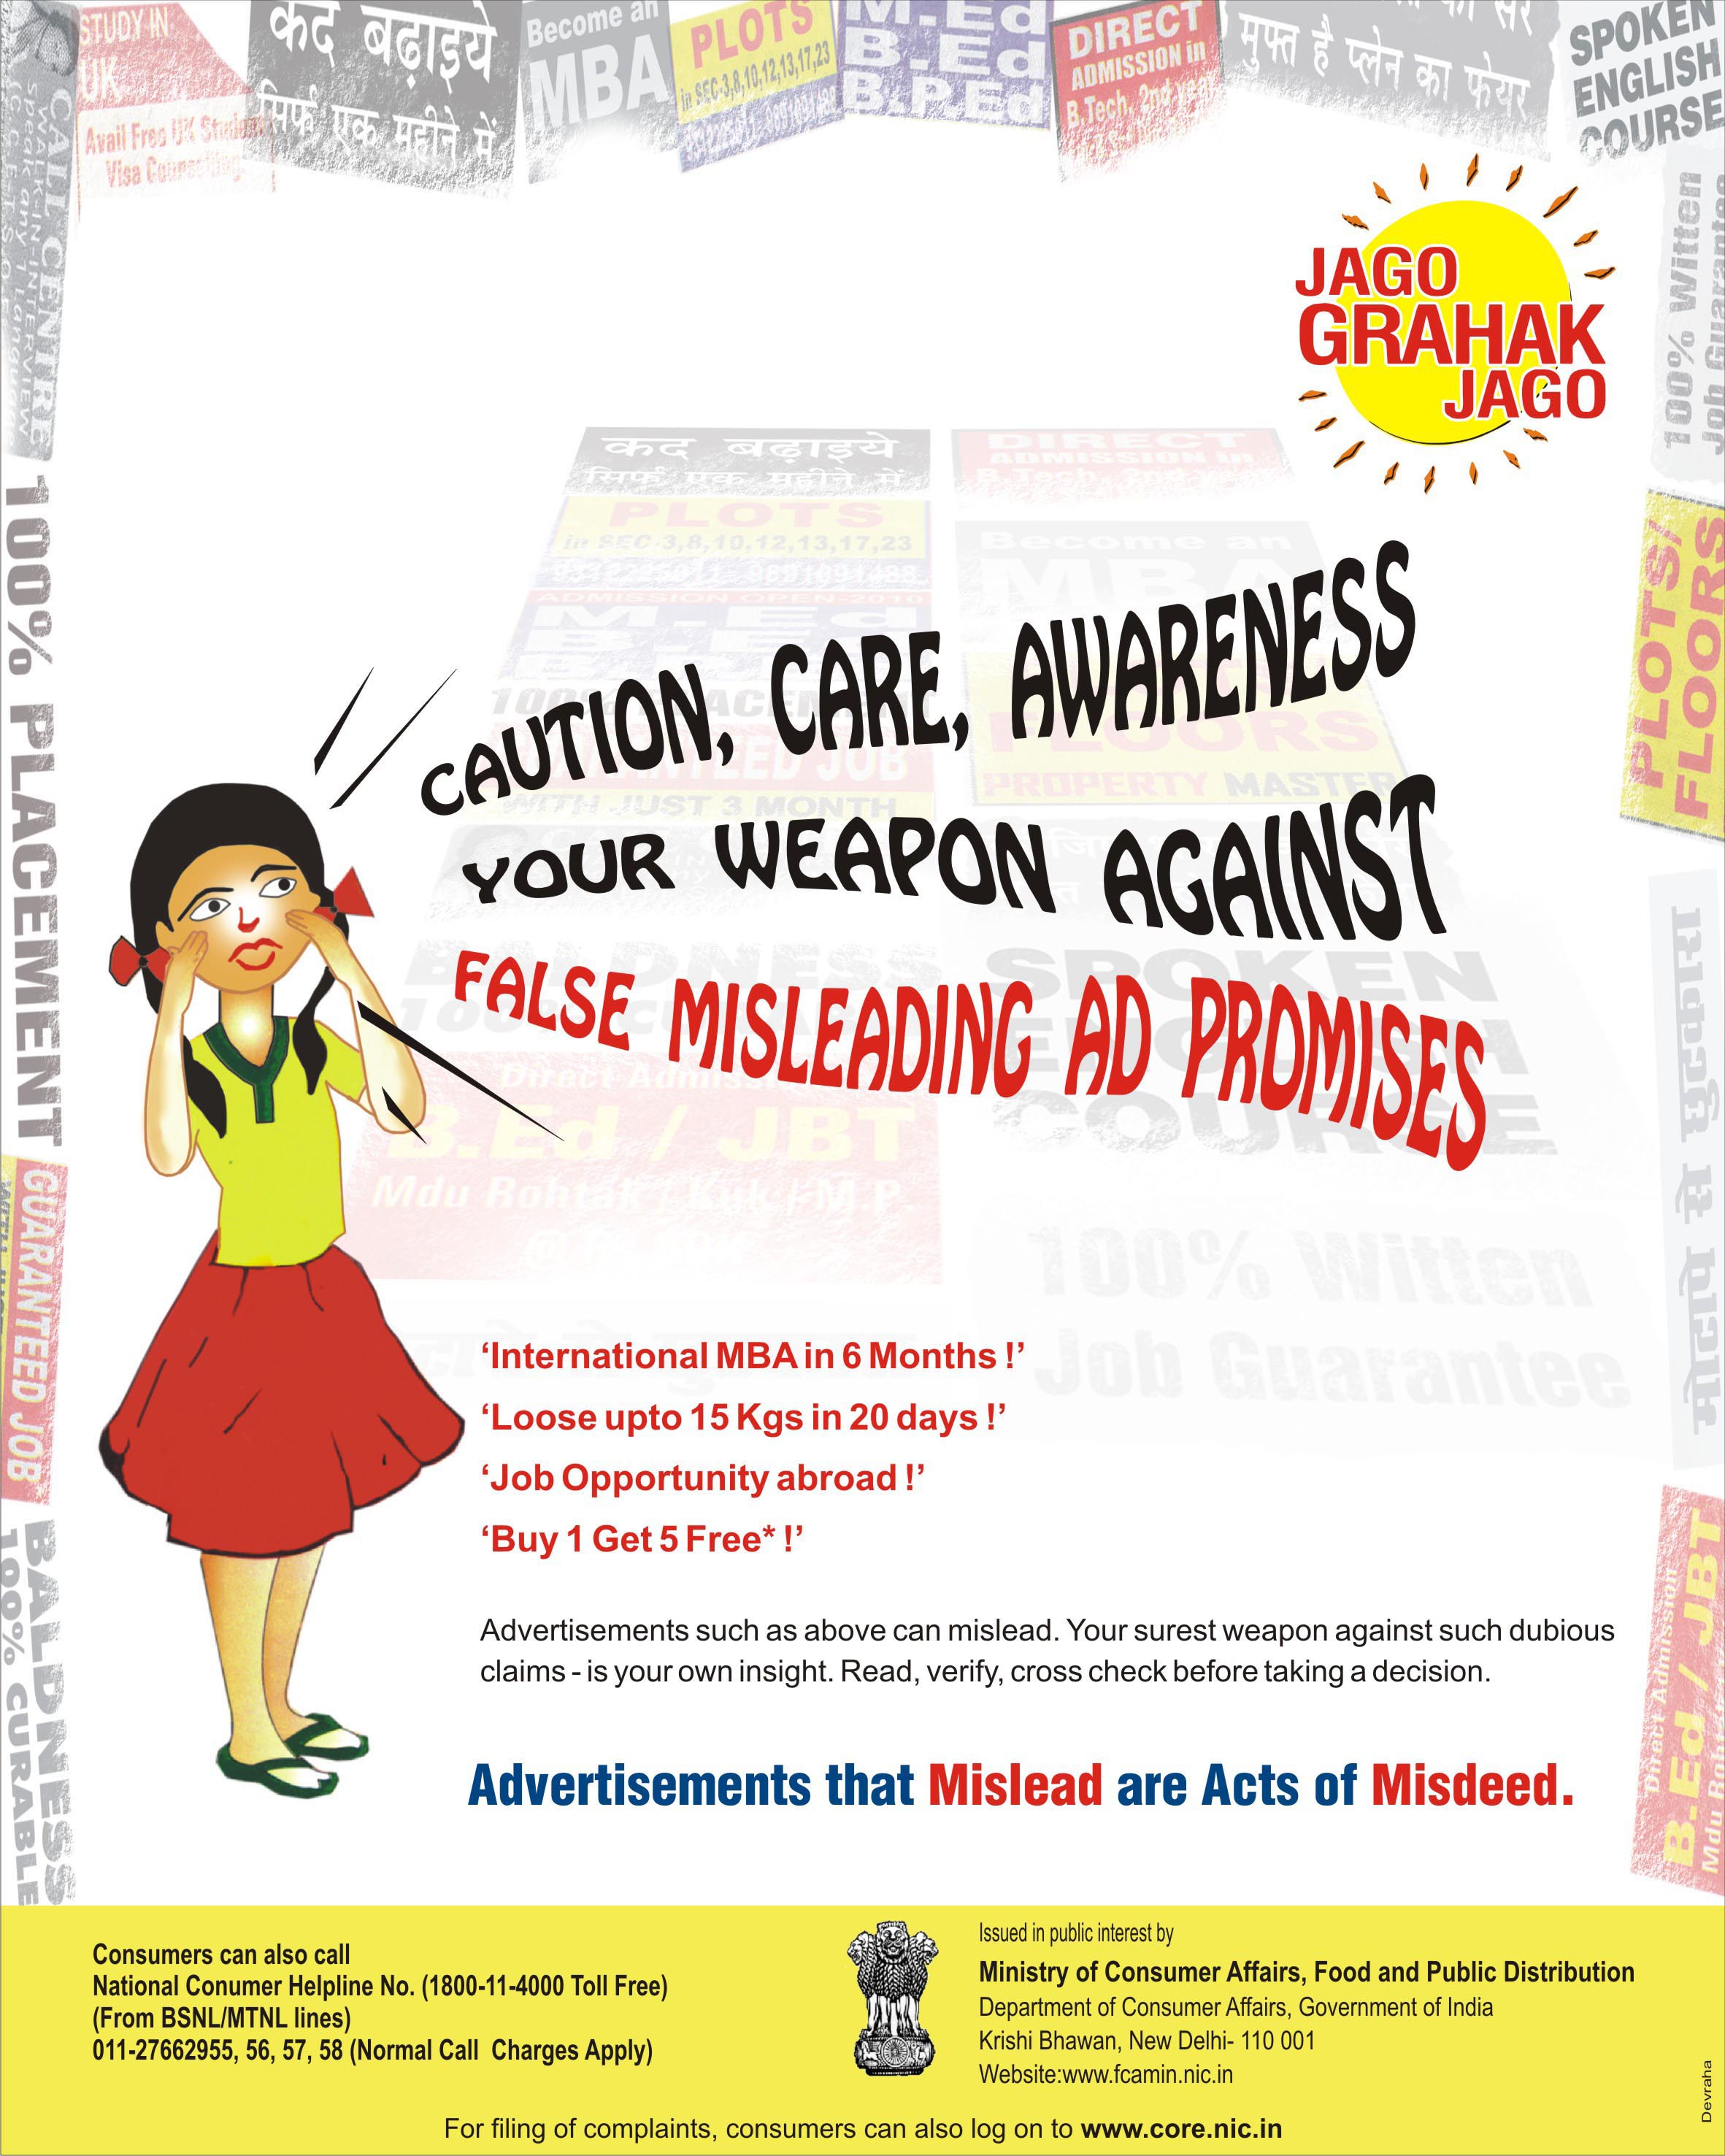 consumer rights awareness posters